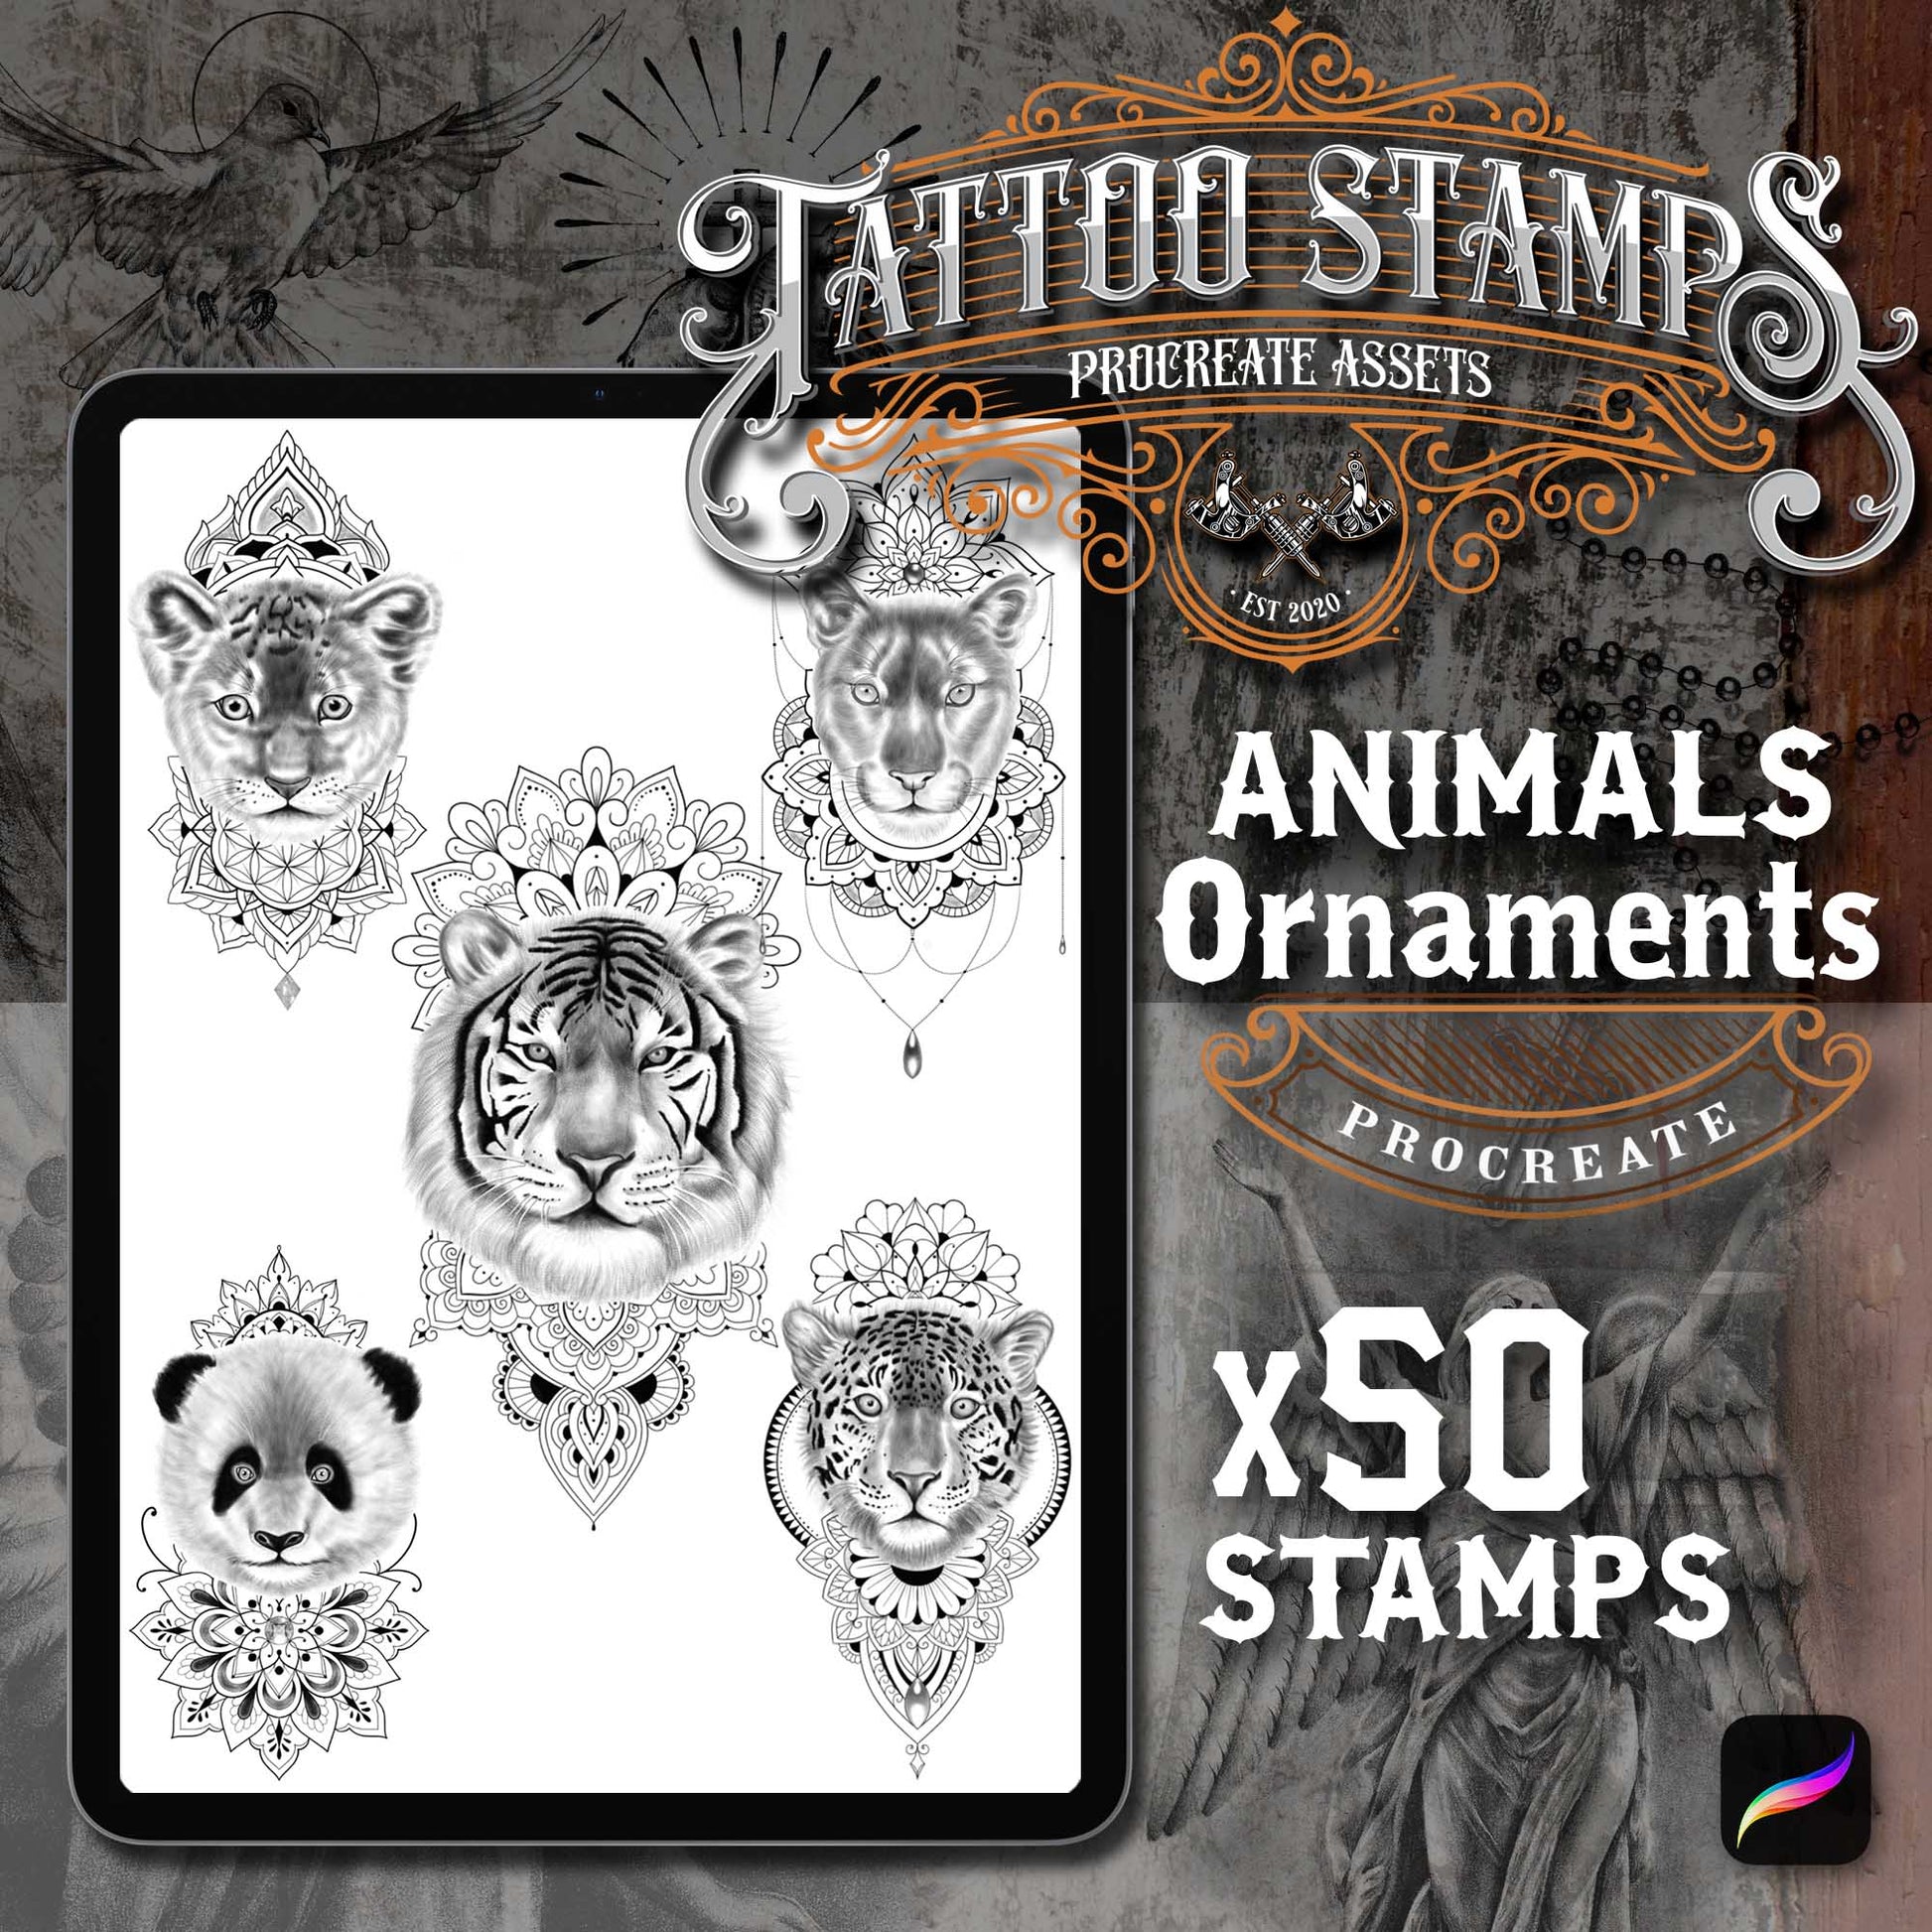 50 Ornamentals and Animals Tattoo Procreate app for iPad & iPad pro  in the Master Pack by TattooStampsArt